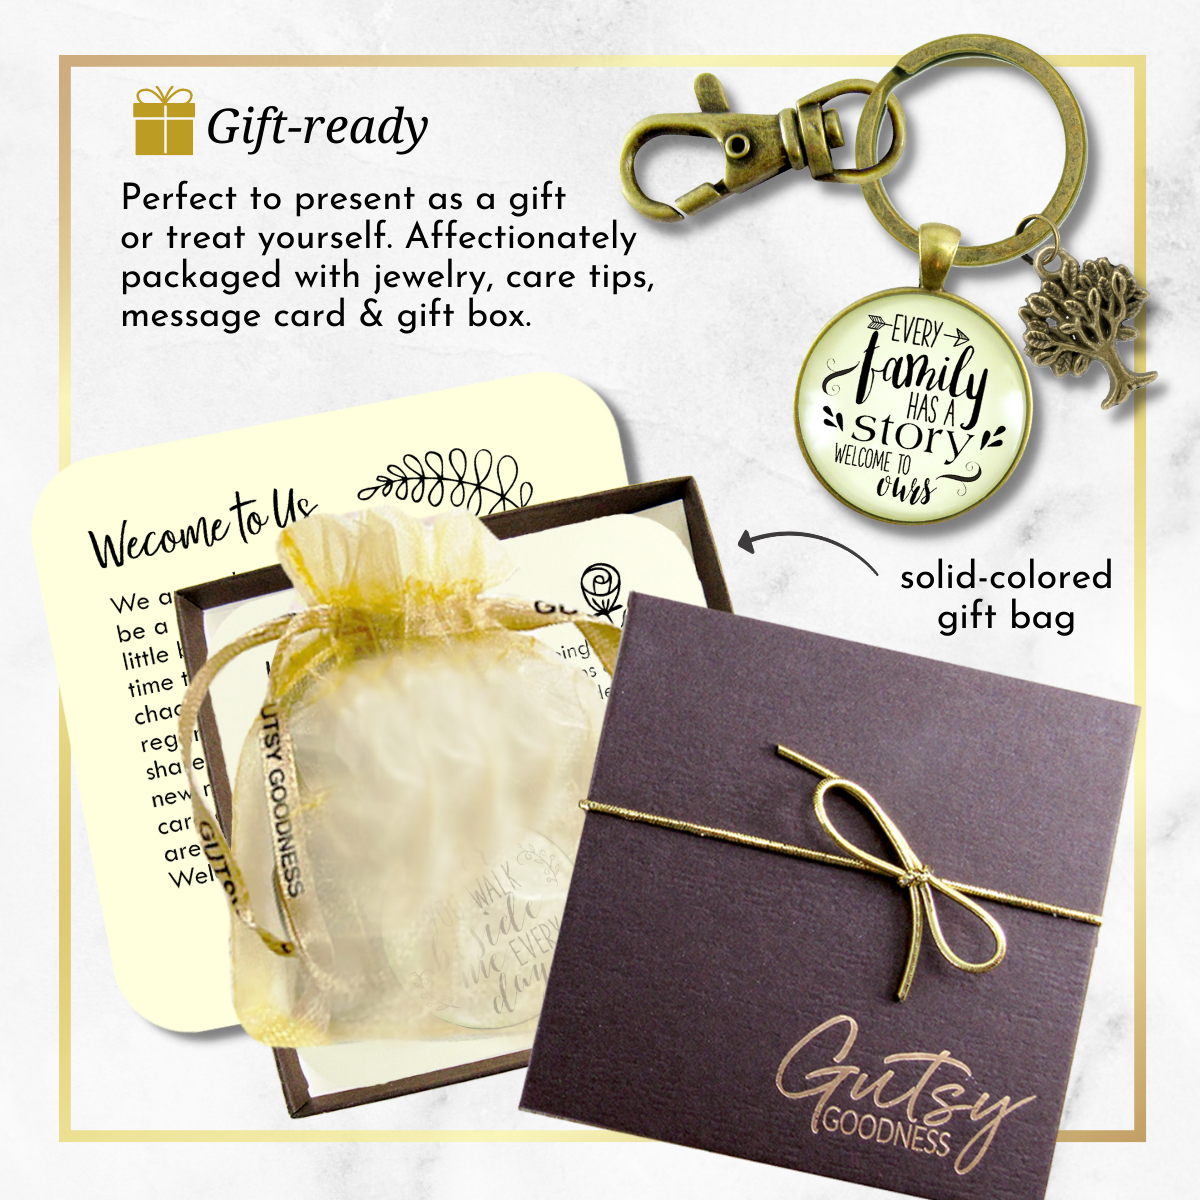 Gutsy Goodness Every Family Has A Story Welcome Keychain Gift in Law Step Bonus Child Adoption, Kids Unisex, Size: One size, Bronze